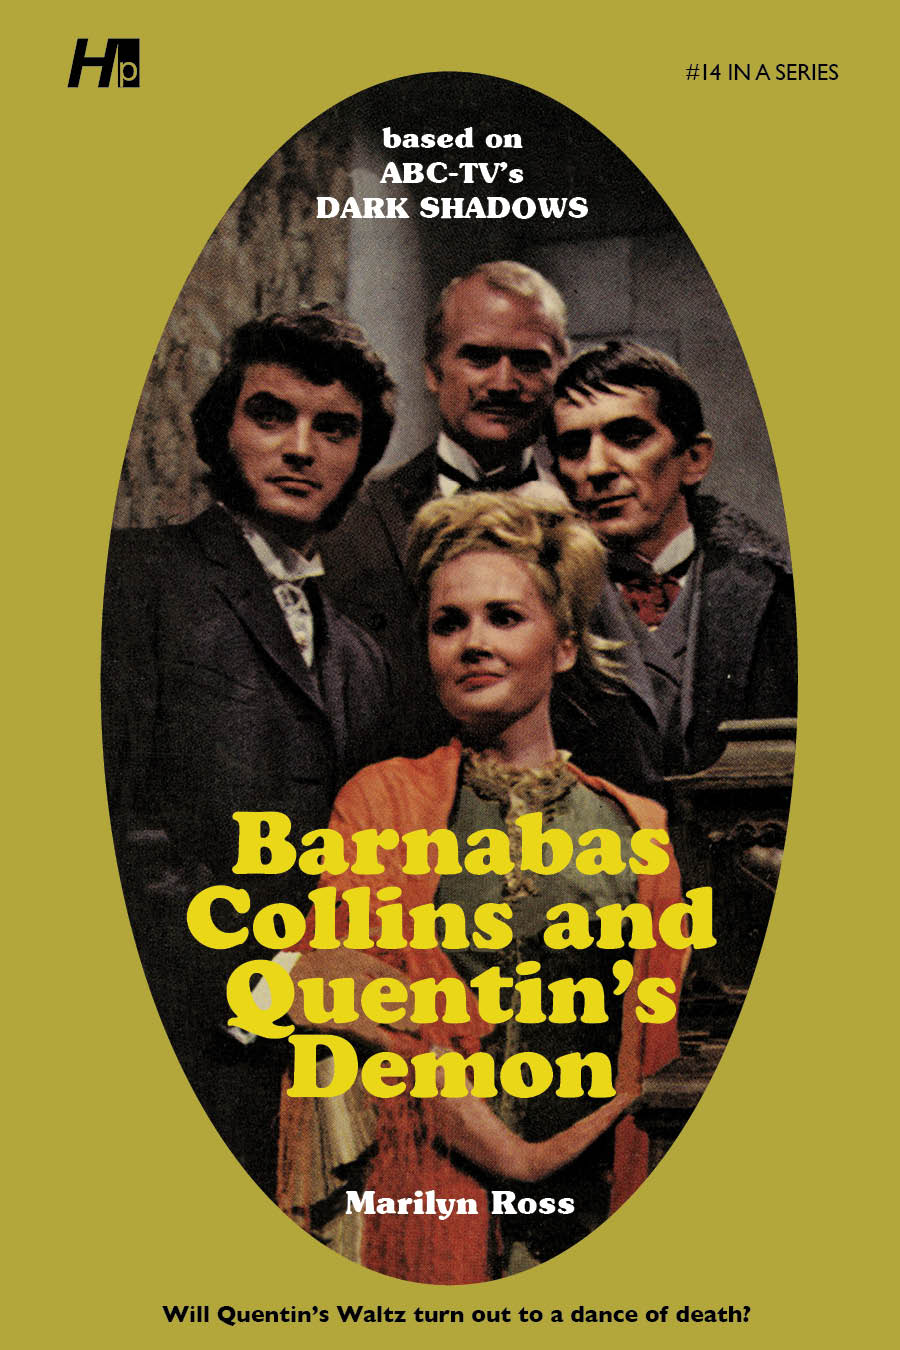 Dark Shadows #14: Barnabas Collins and Quentin's Demon [Paperback]